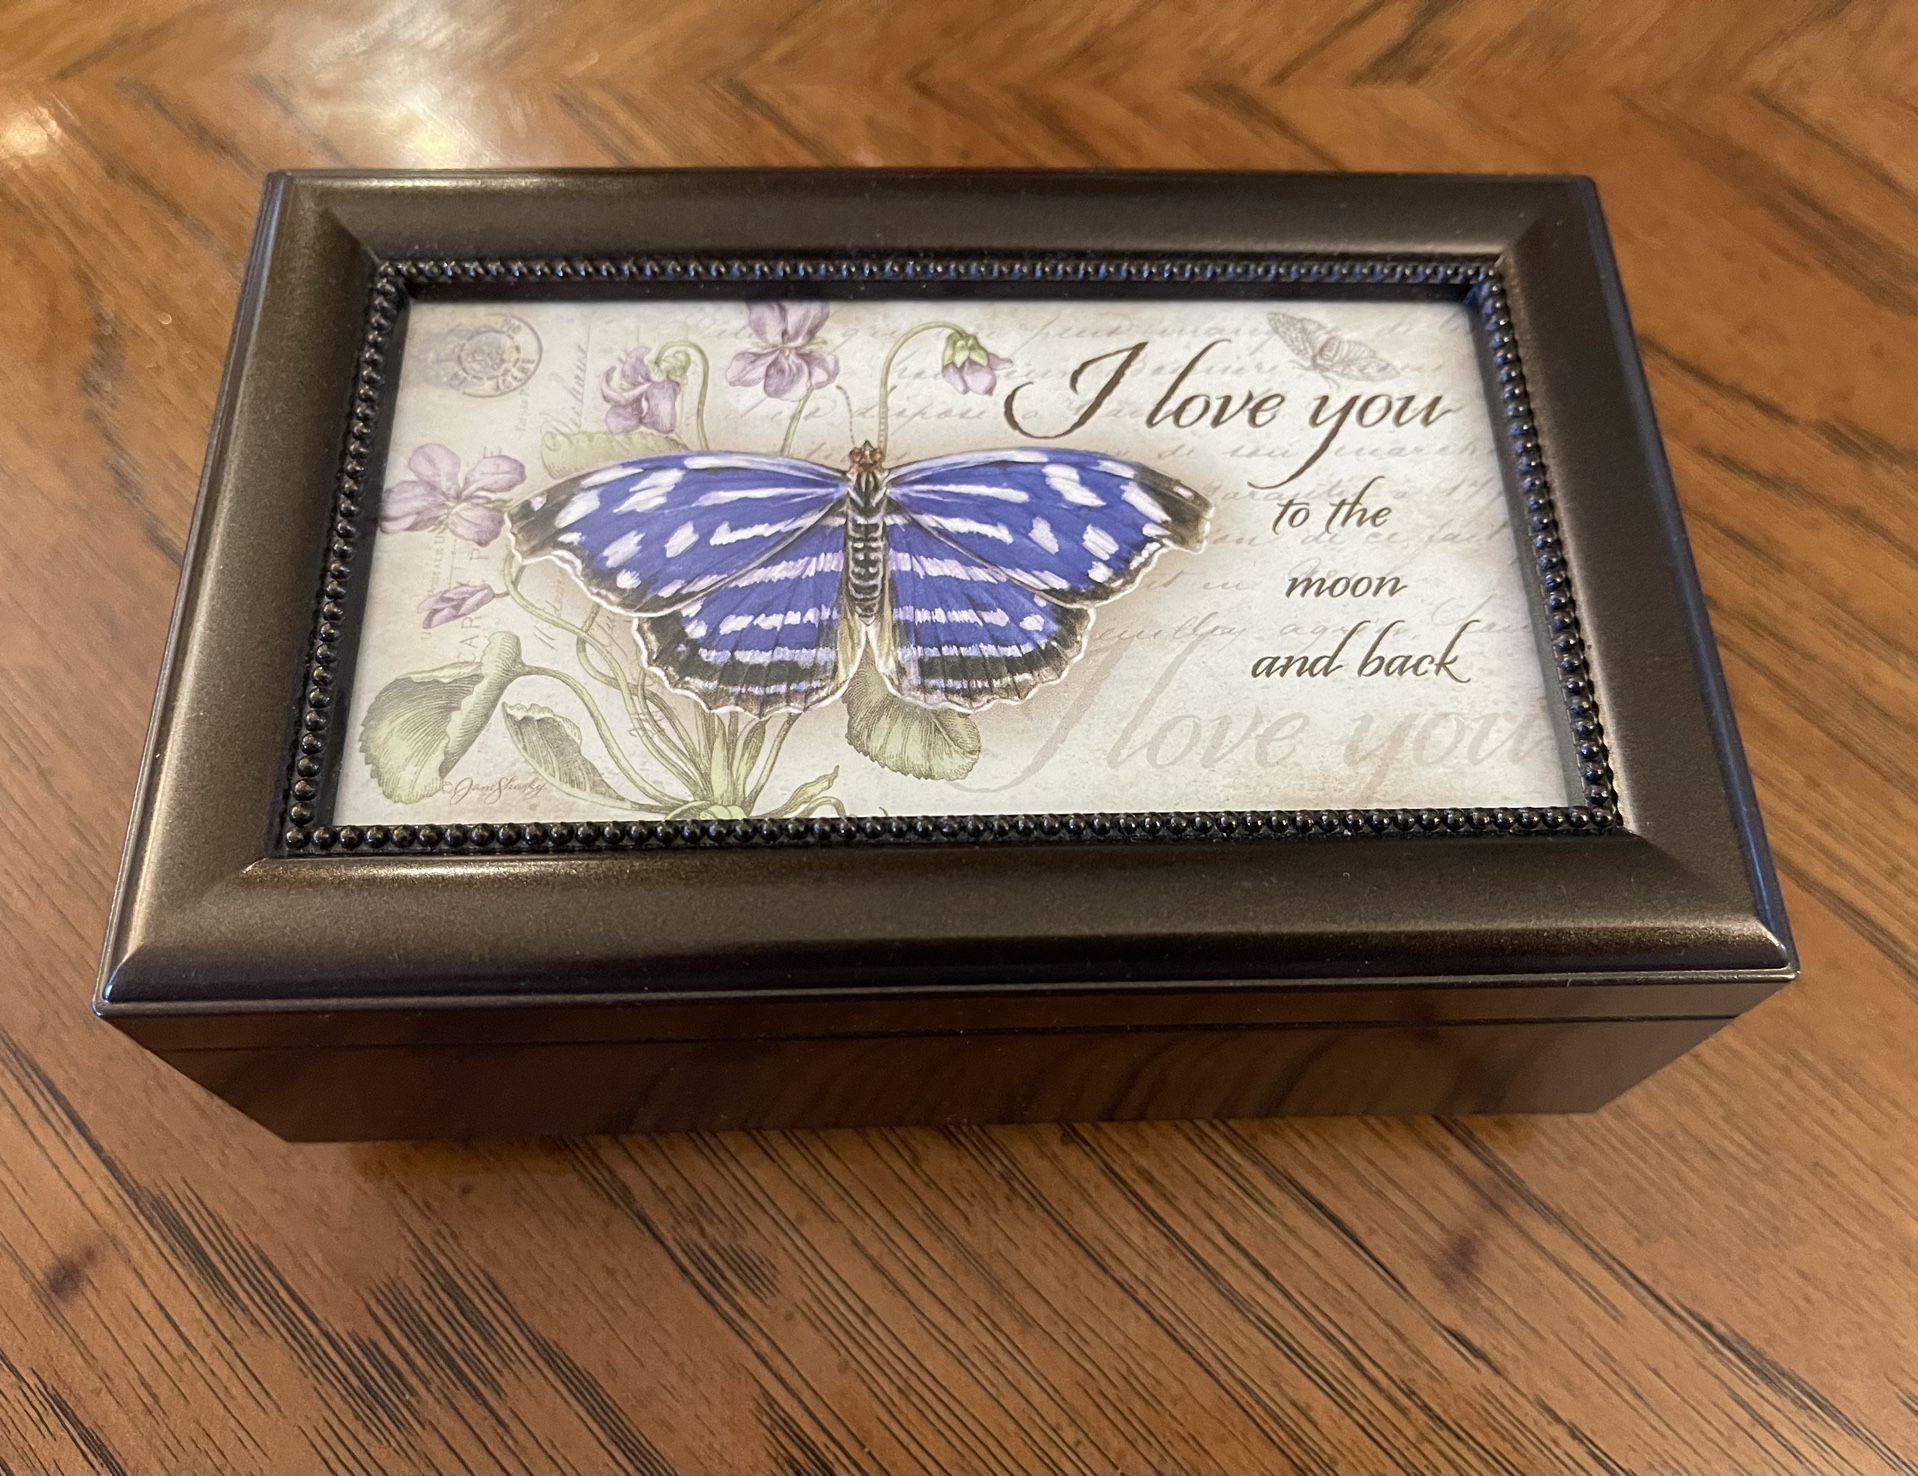 Gorgeous  Carson - Jane Shasky Music Box - I Love You to the Moon & Back - Plays “Blue Danube”